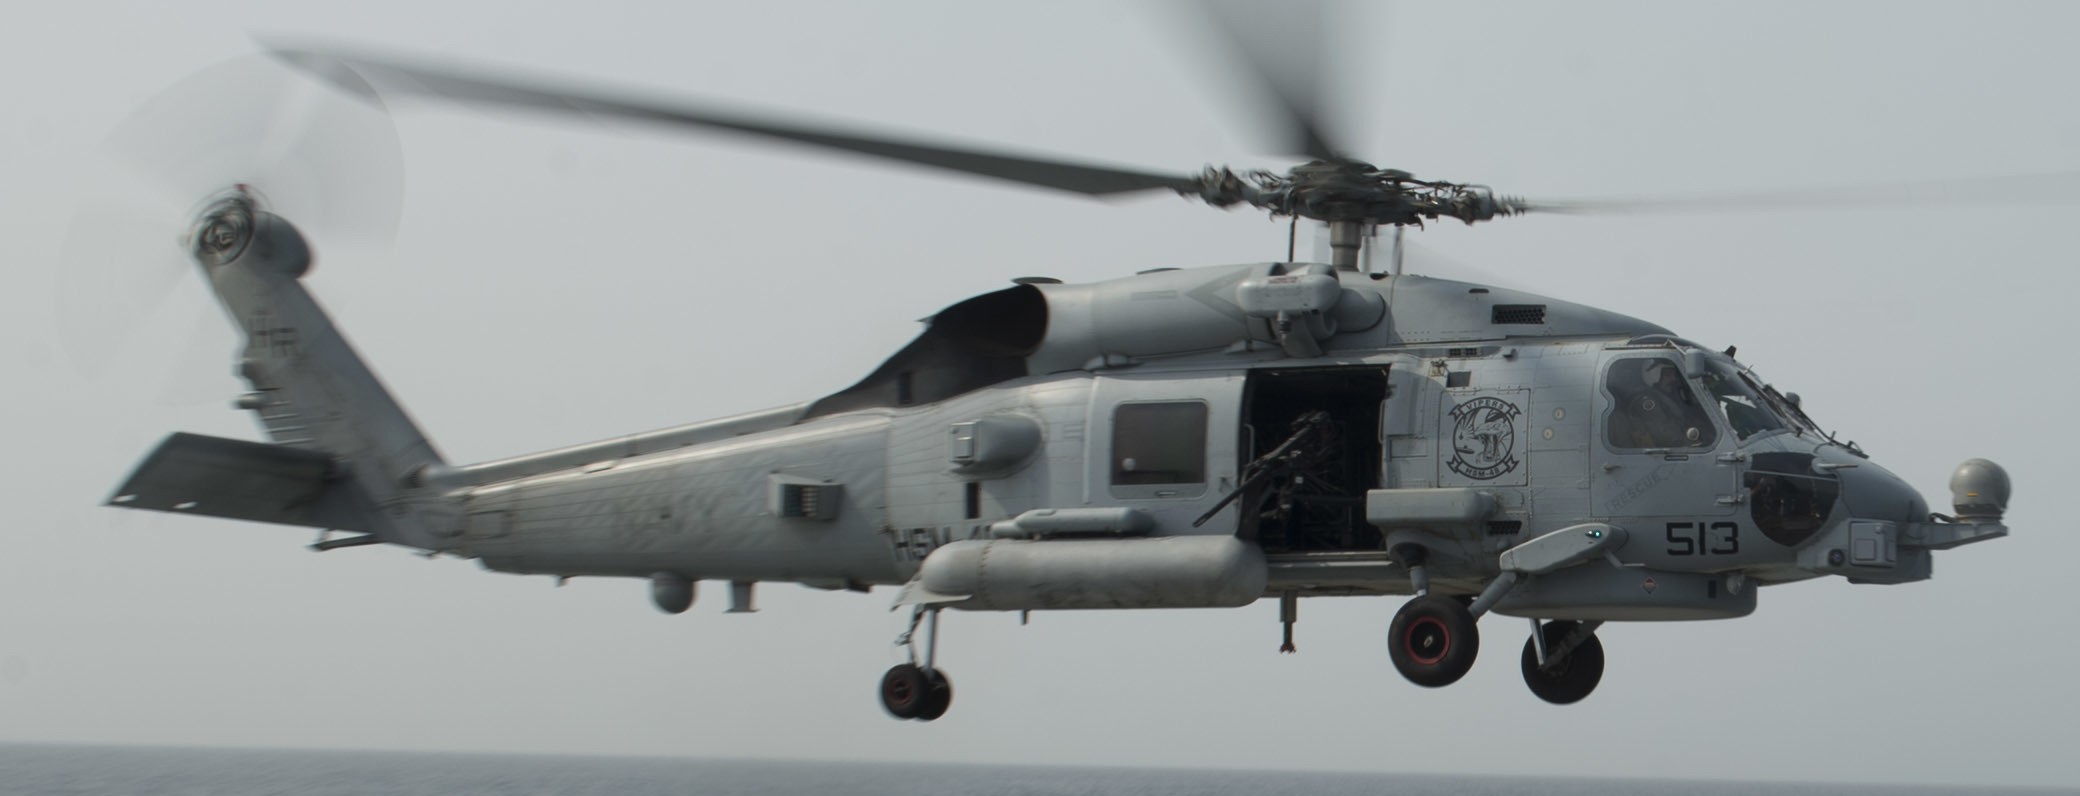 hsm-48 vipers helicopter maritime strike squadron mh-60r seahawk 2016 20